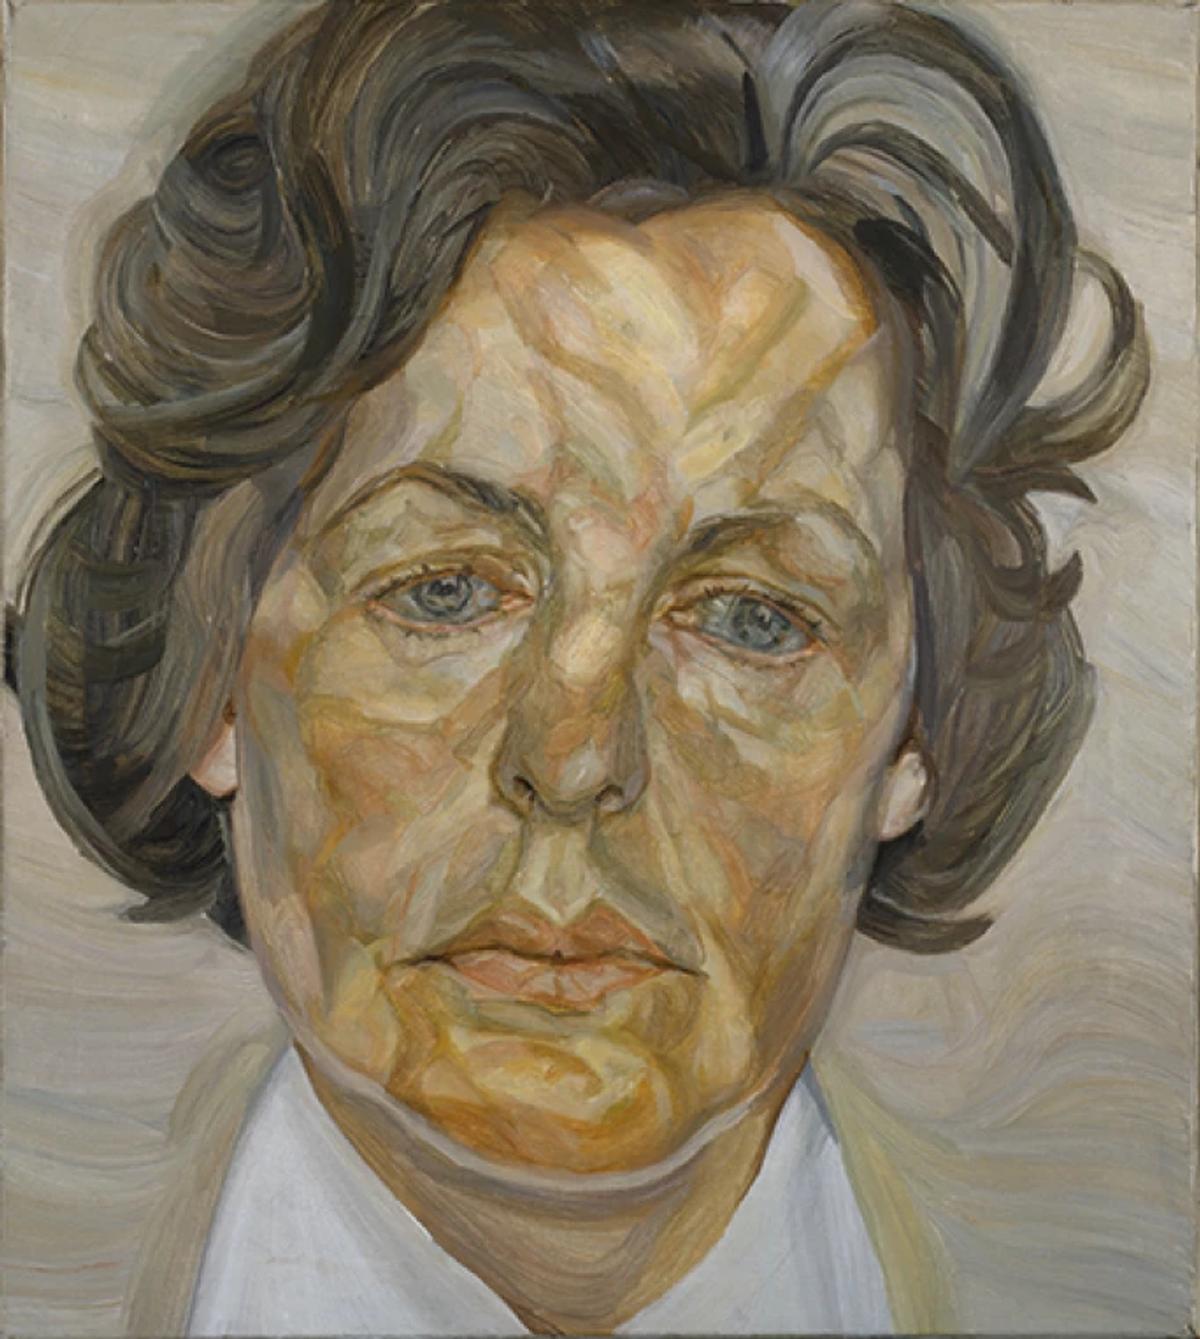 Lucian Freud's Woman in a White Shirt (1957)